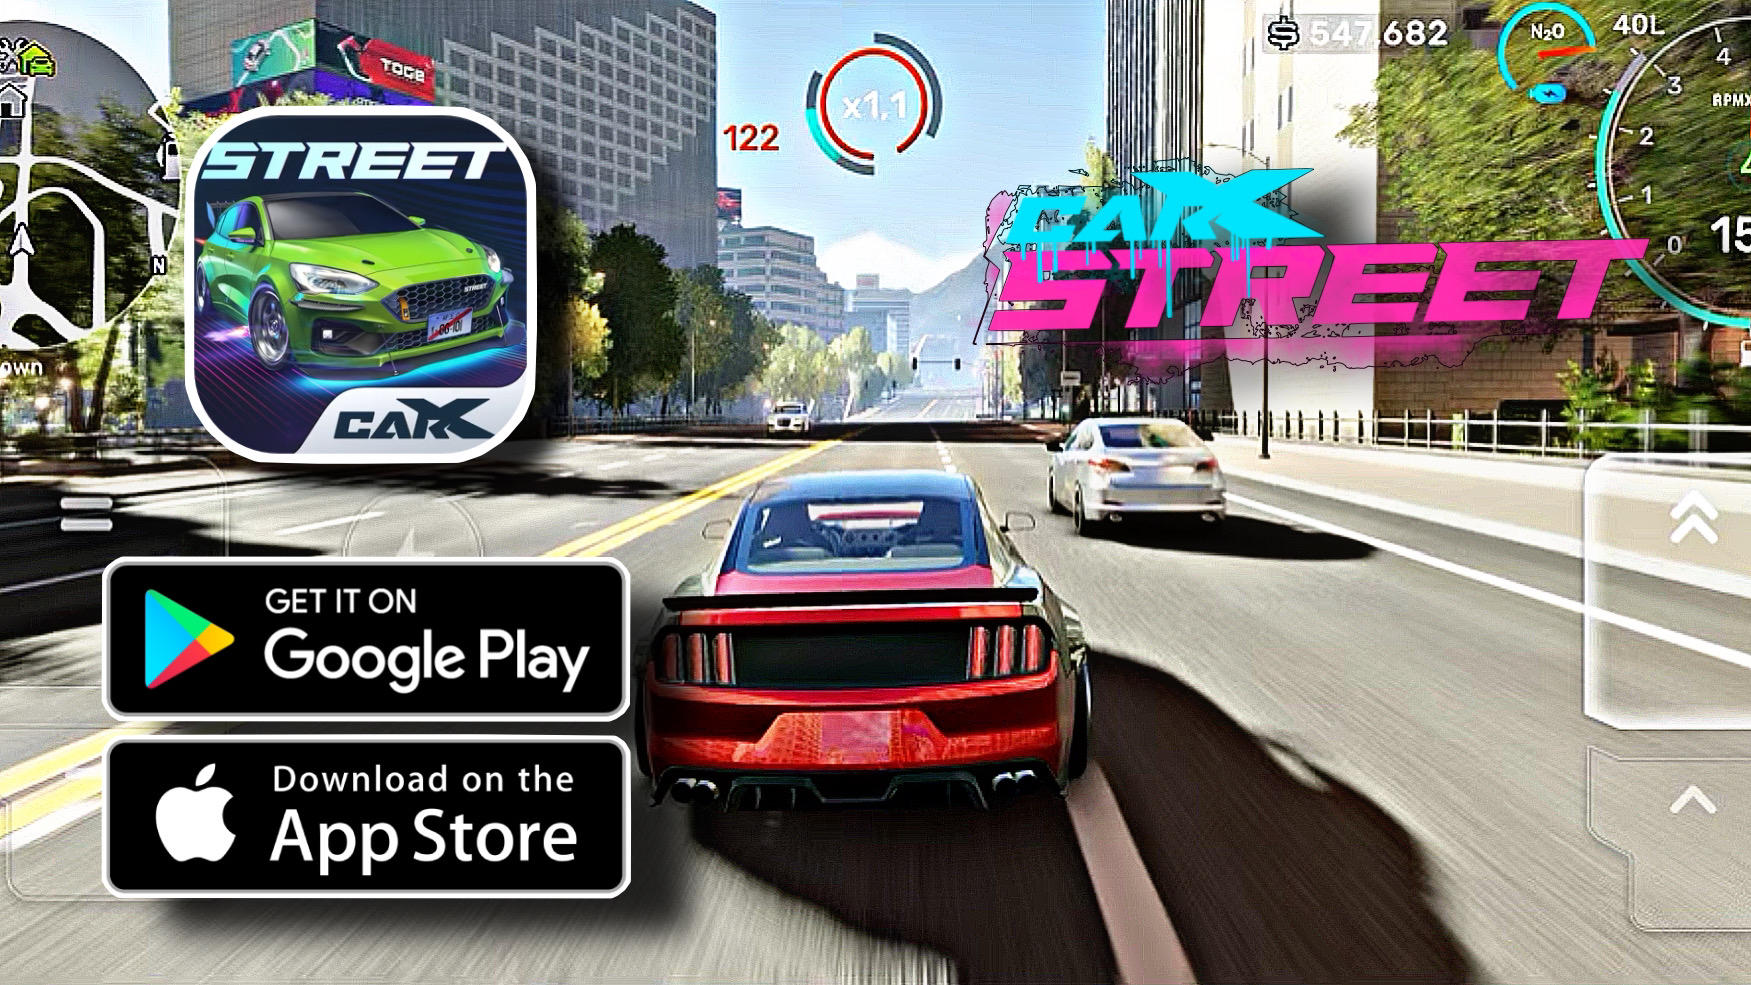 CarX Drift Racing 2 - Android Gameplay 